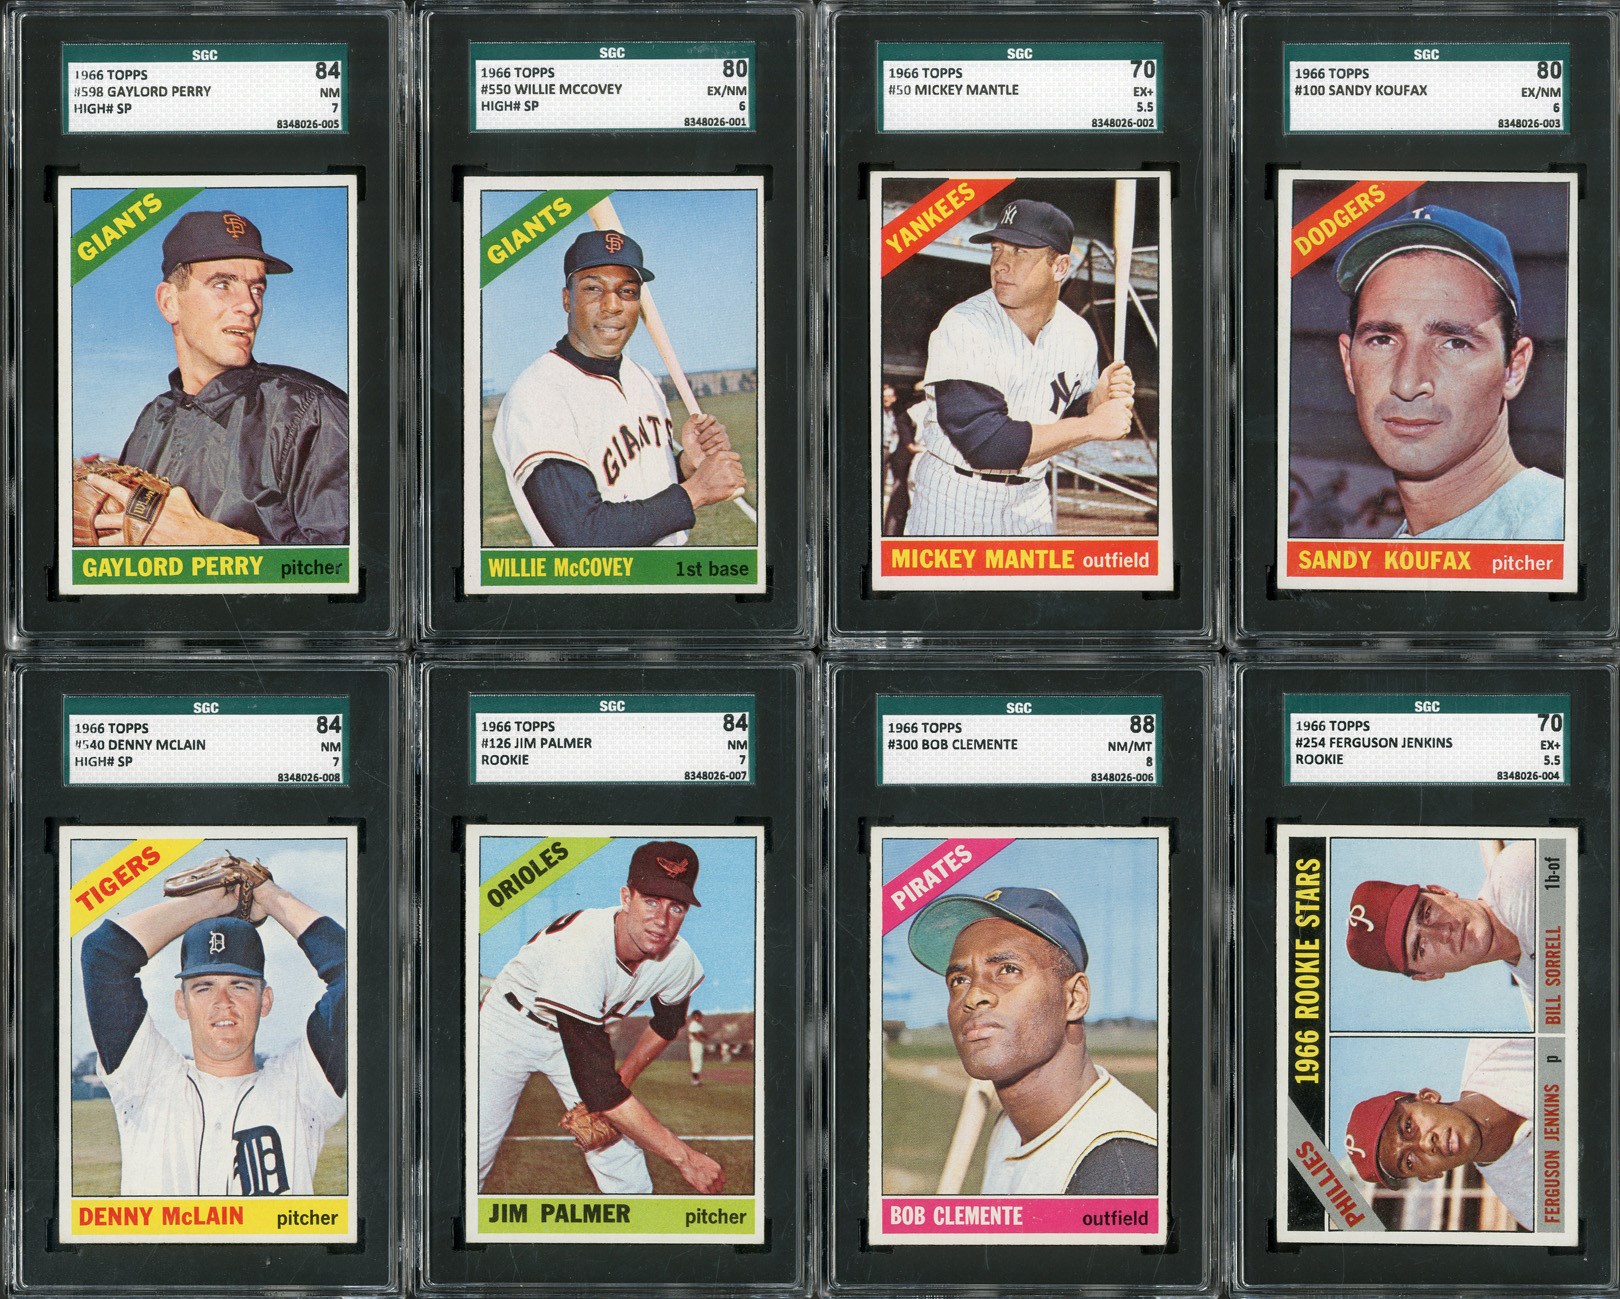 1966 Topps Complete Set (598 Cards - 8 SGC Graded)